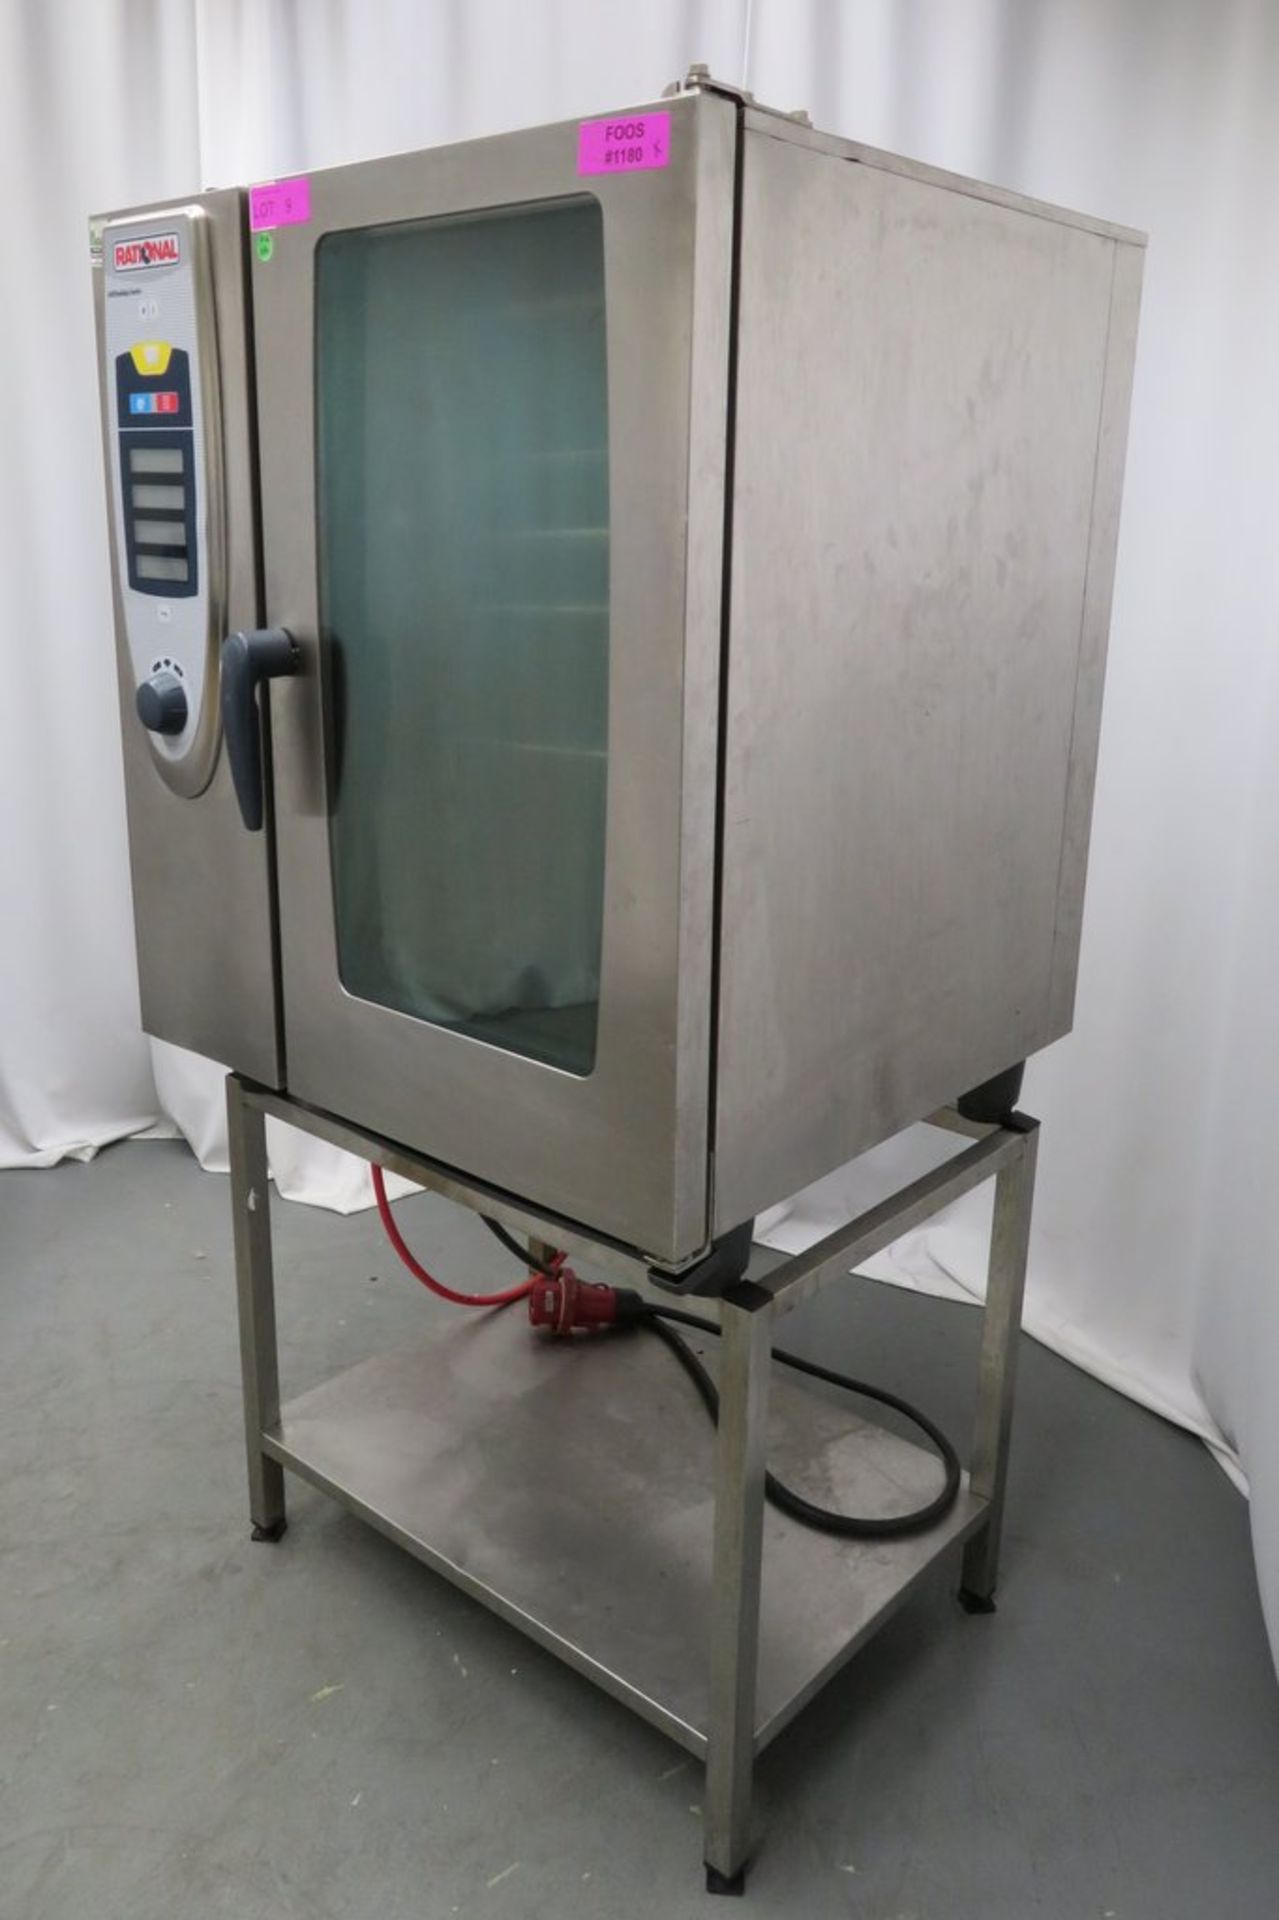 Rational SCC101 10 grid combi oven, 3 phase electric - Image 3 of 10